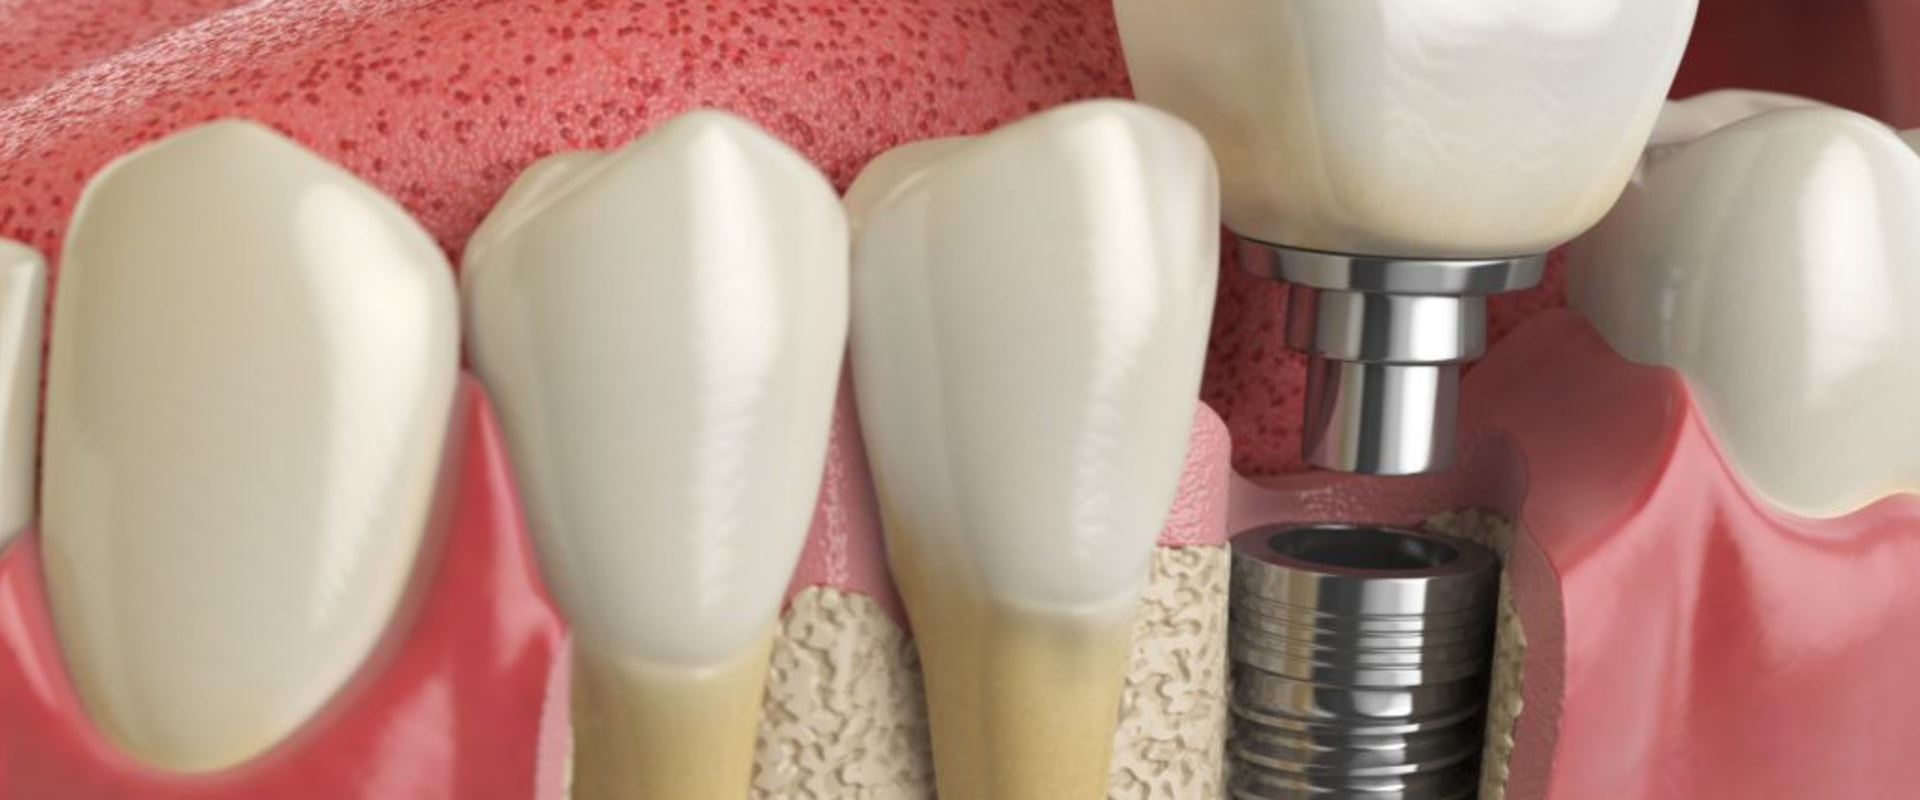 Why dental implants are not covered by insurance?